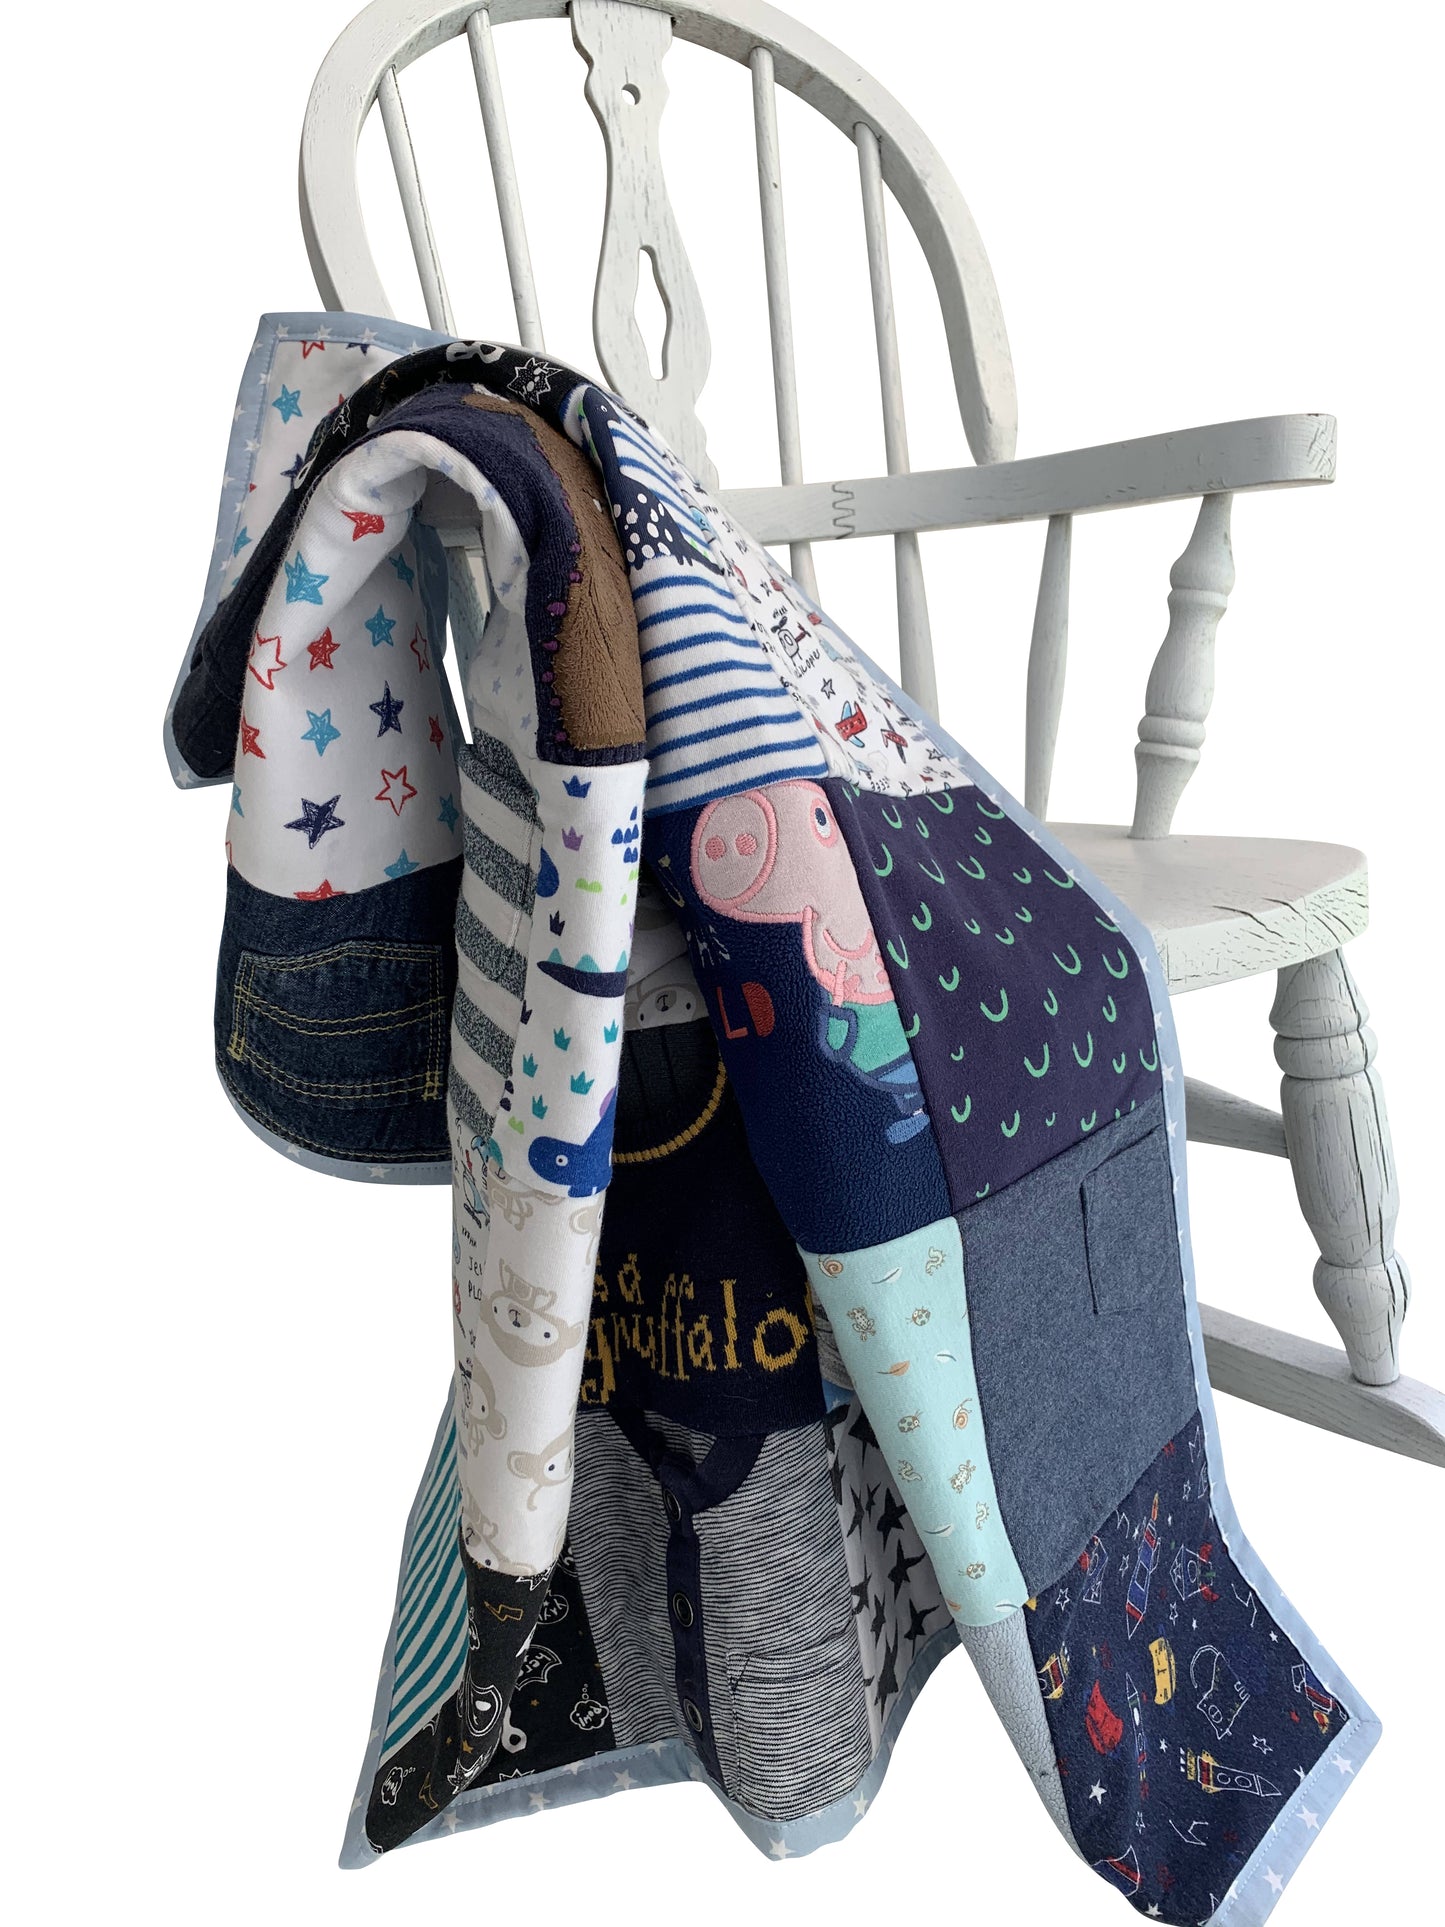 Memory Blanket made from your baby's treasured clothes